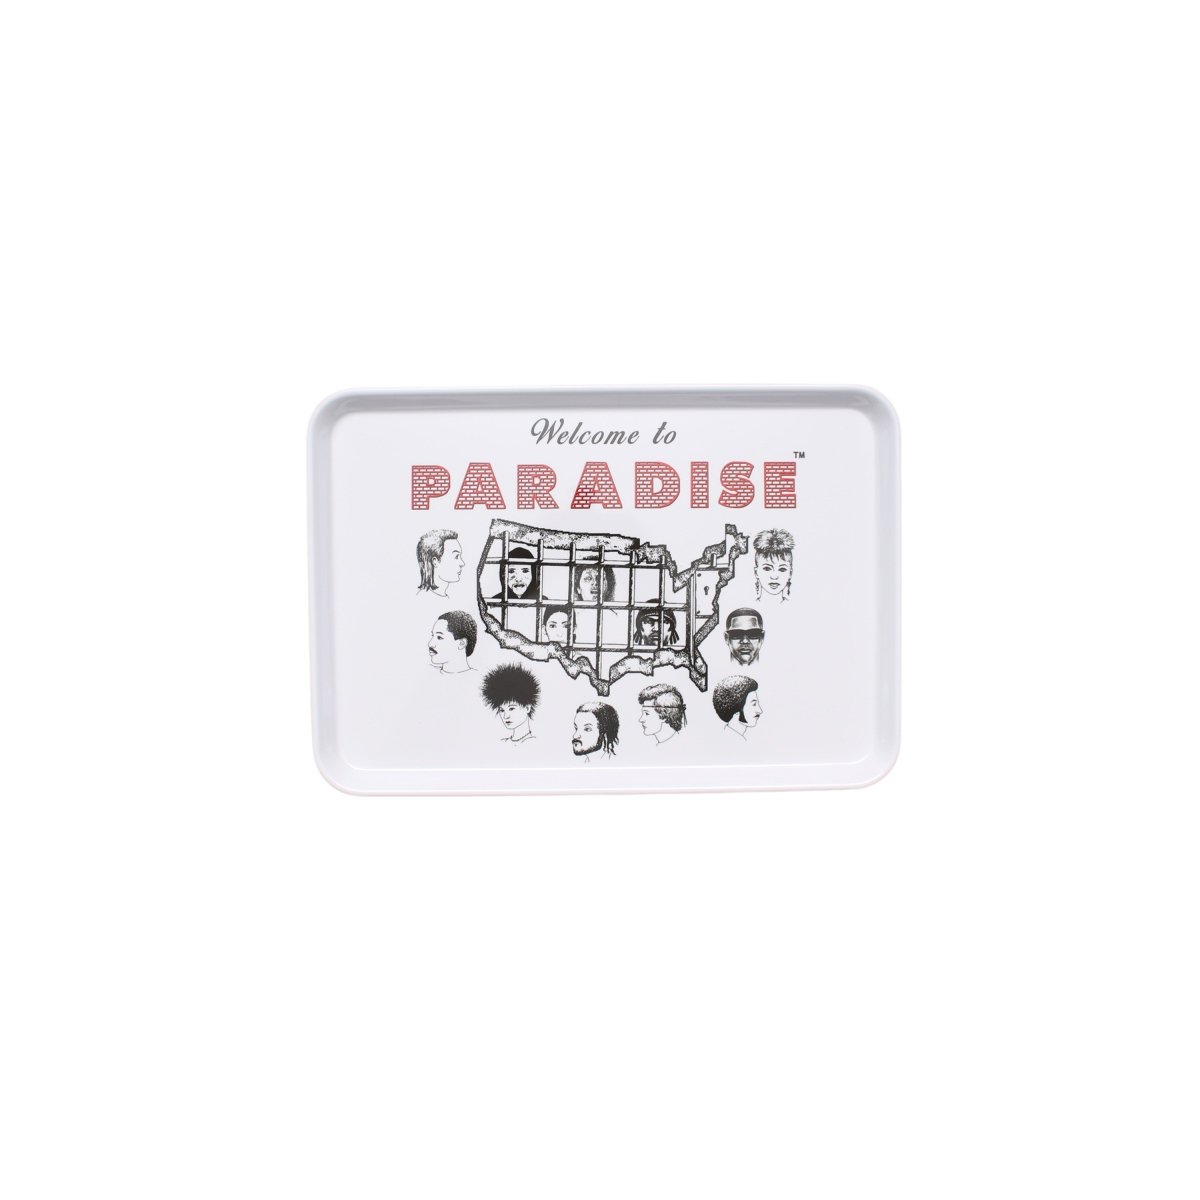 WELCOME TO PARADISE WEED TRAY 